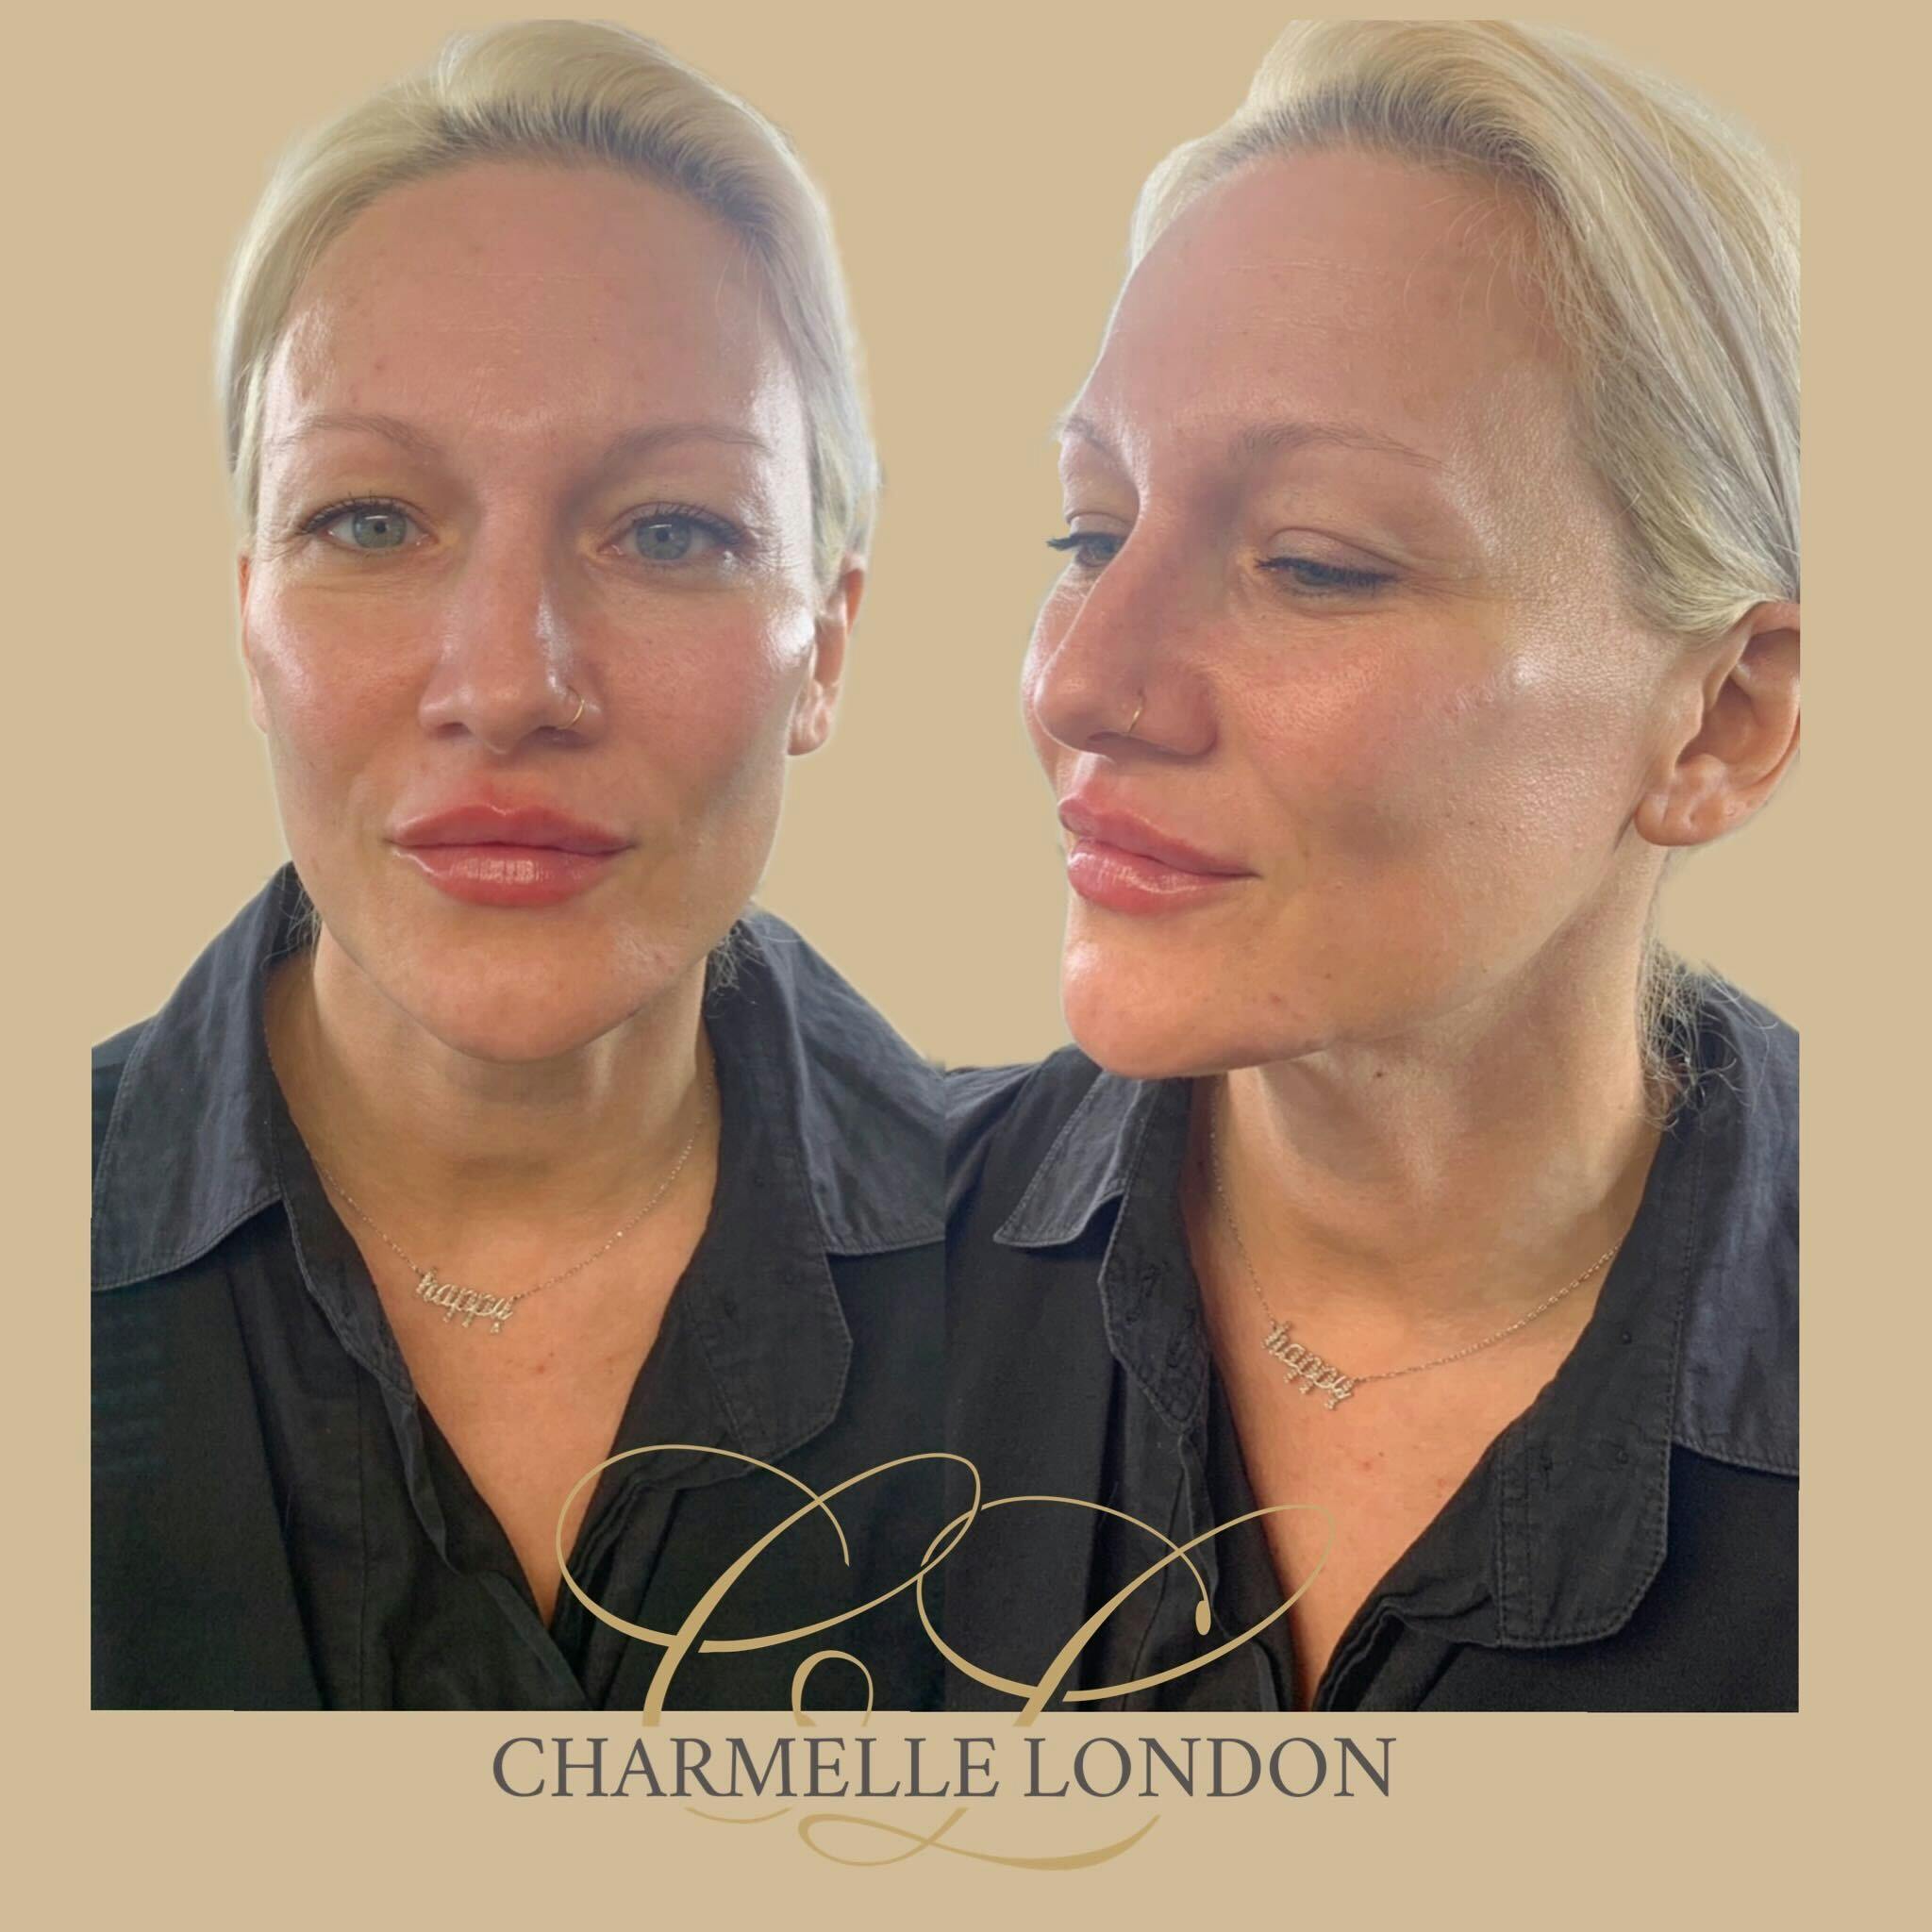 With immediate results, our bespoke facial enhancements cater to a variety of client needs and concerns. Improve the elasticity, smoothness and appearence of fine lines in your skin whilst boosting hydration and vitality. Our clients experience emboldened confidence after receiving a facial enhancement at Charmelle London.